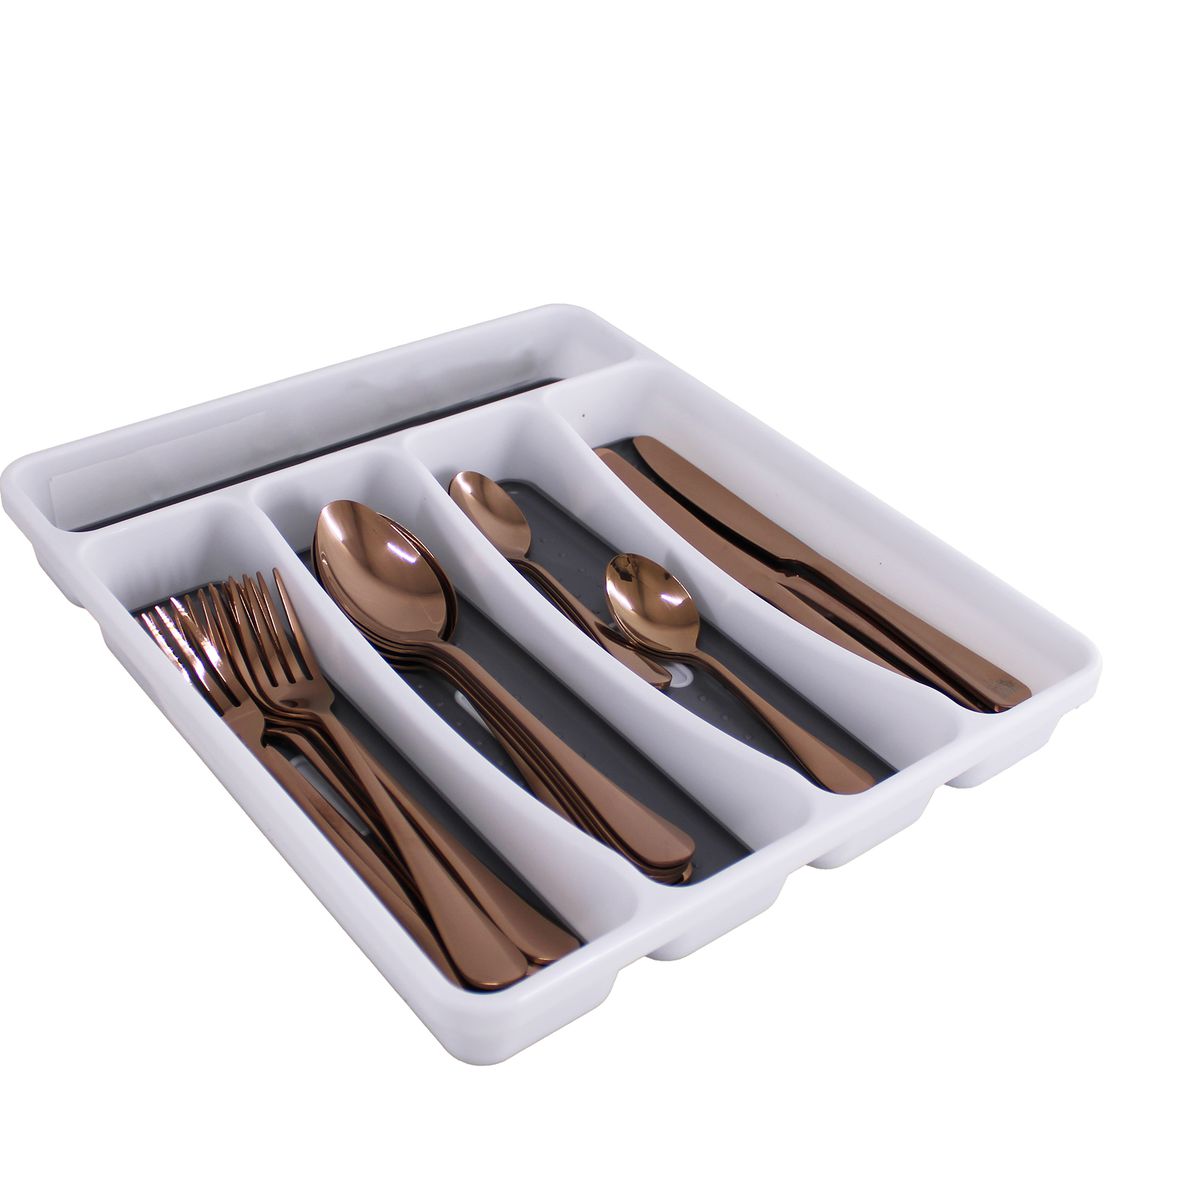 LMA 25 Piece Stainless Steel Cutlery & 5 Compartment Cutlery Organiser Set